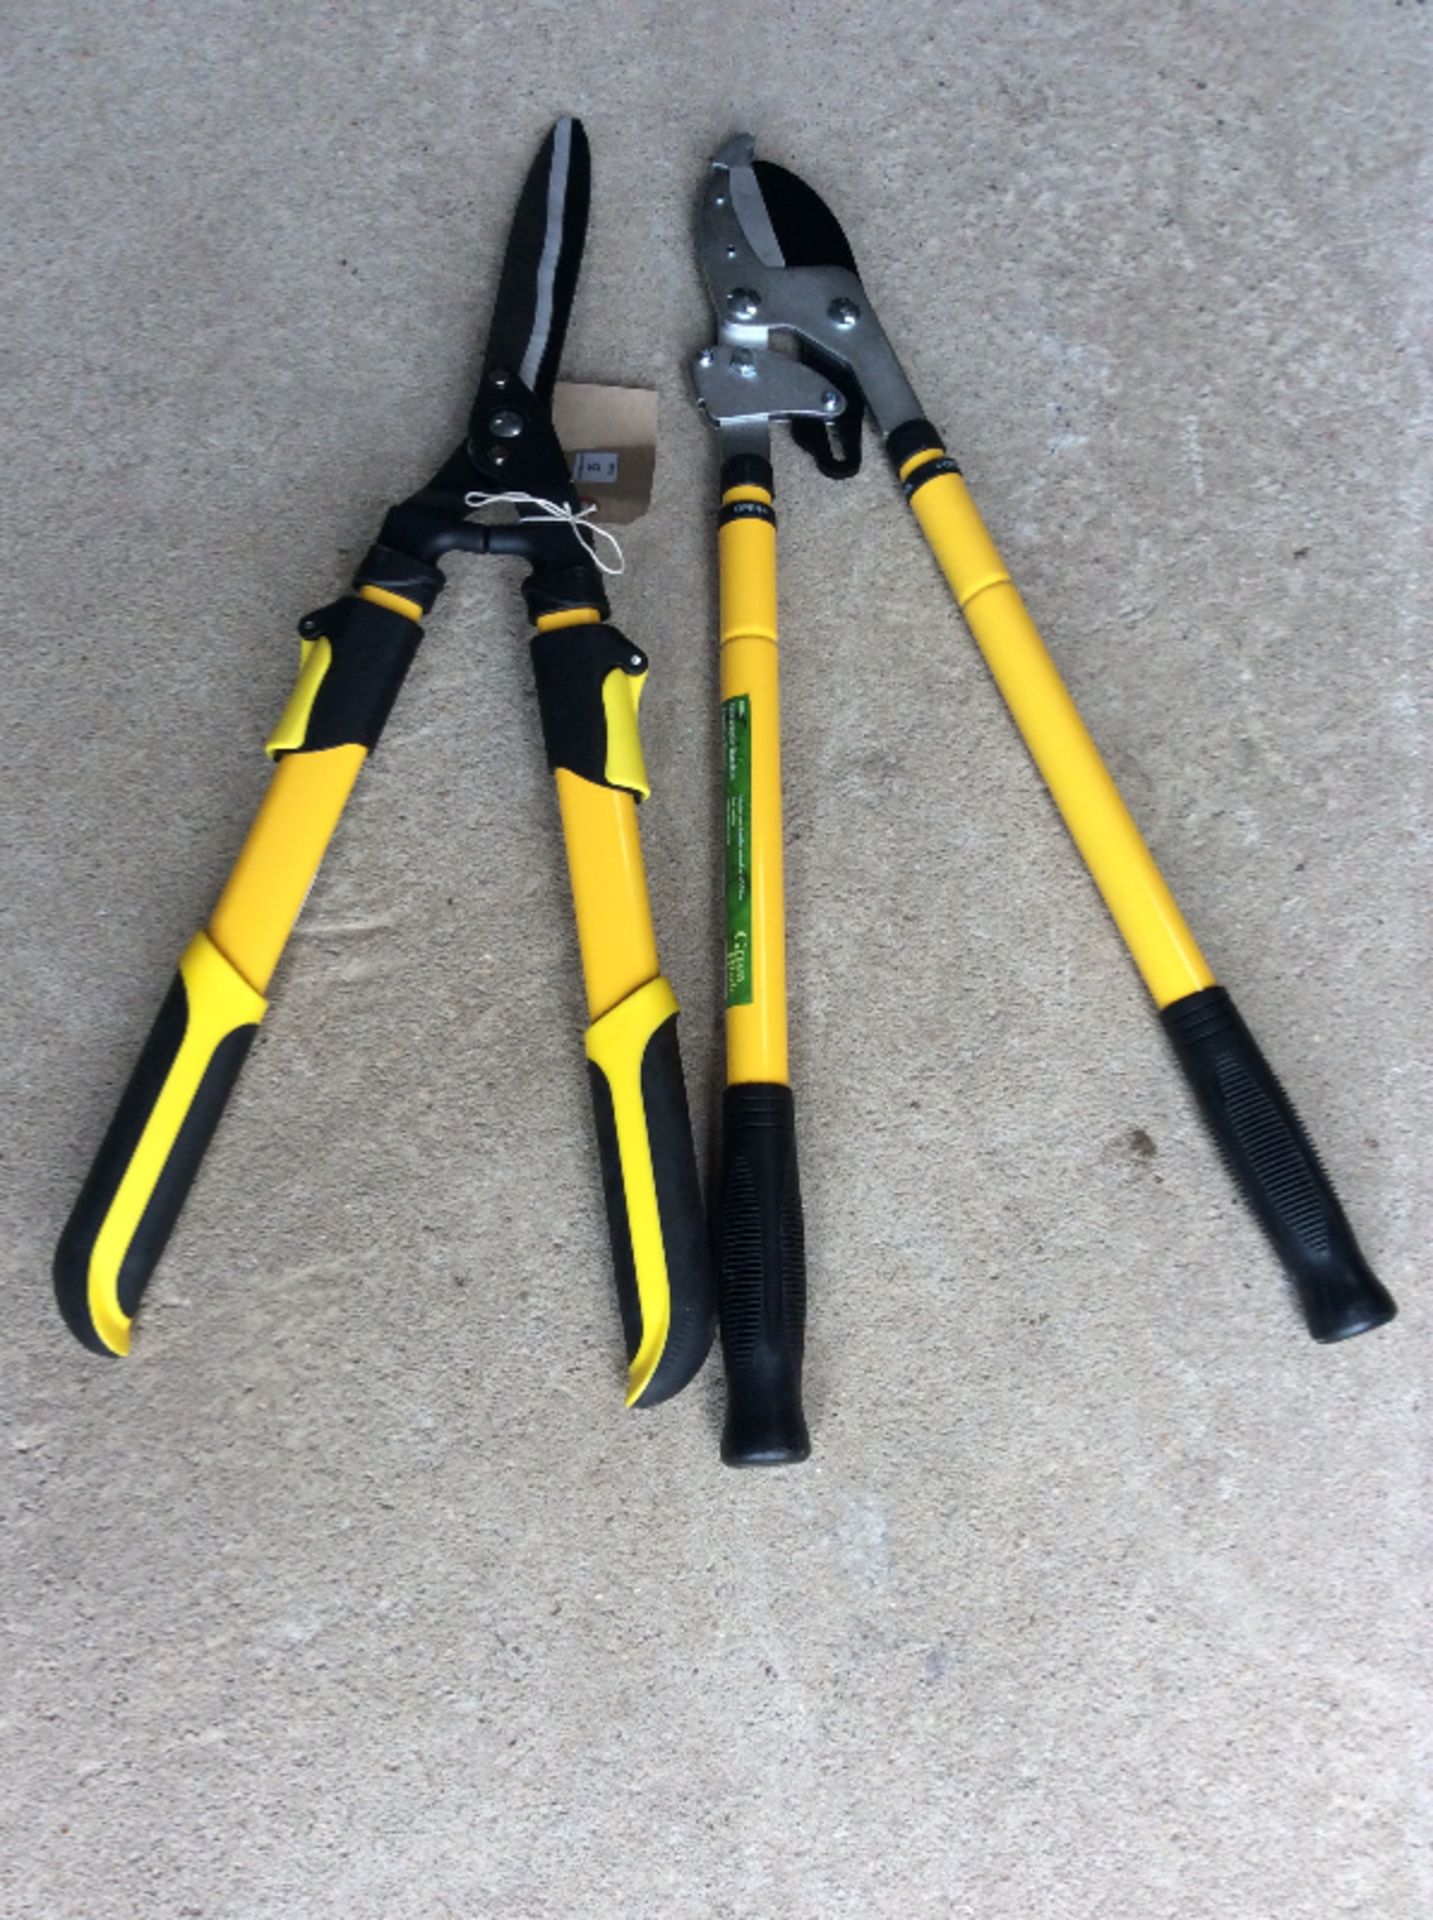 Telescopic ratchet loppers and telescopic hedging shears